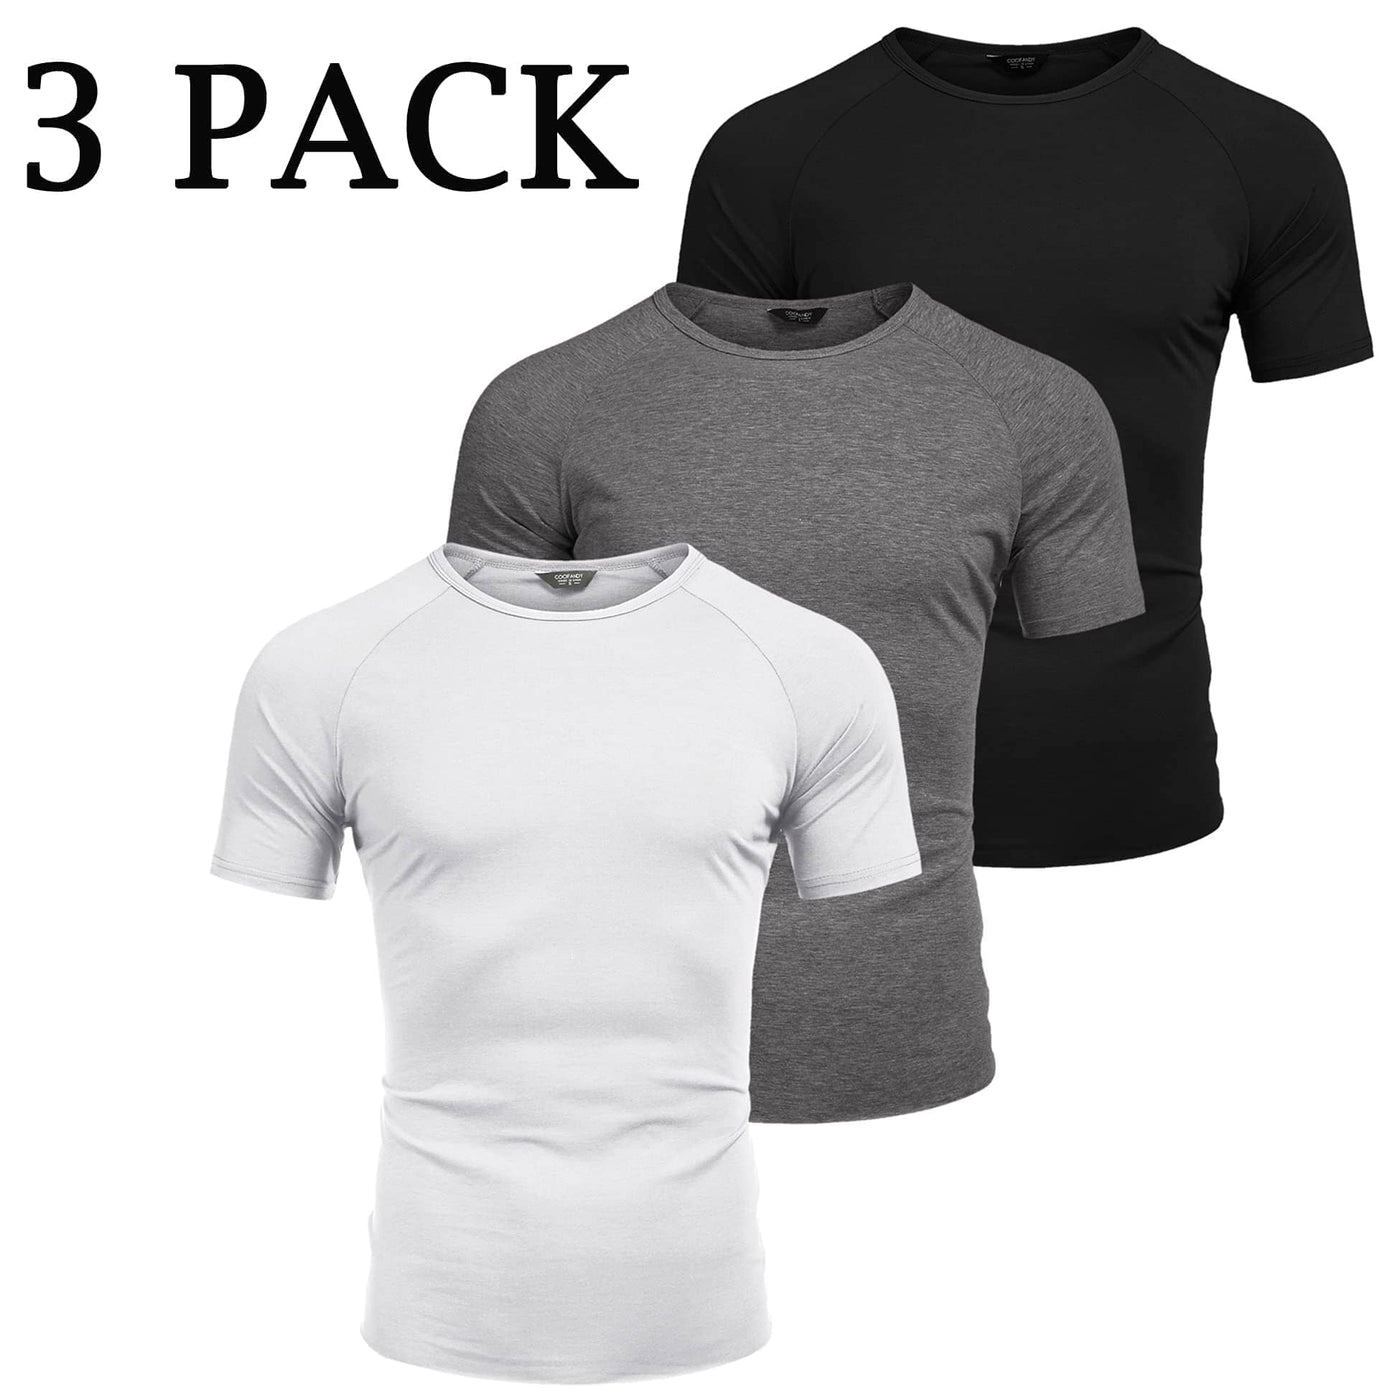 3 Pack Workout T-Shirts (US Only) - High Quality Muscle Shirts for Gym ...